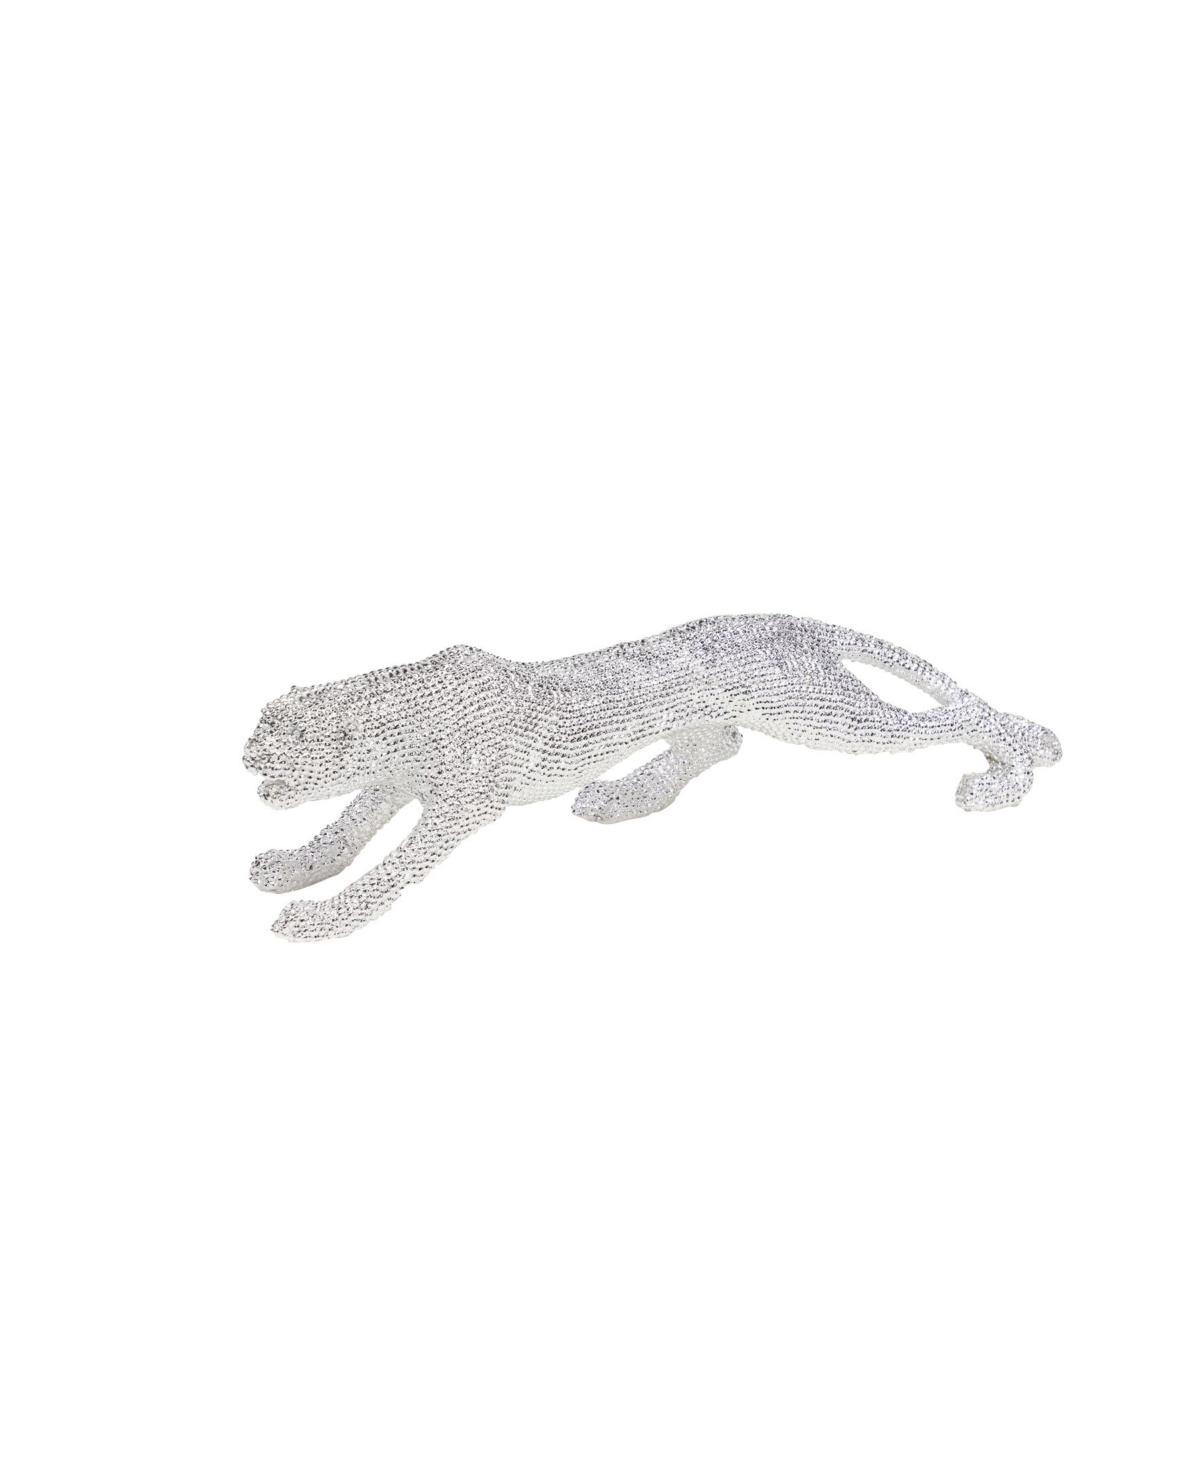 Rosemary Lane Glam Leopard Sculpture, 6" X 23" In Silver-tone